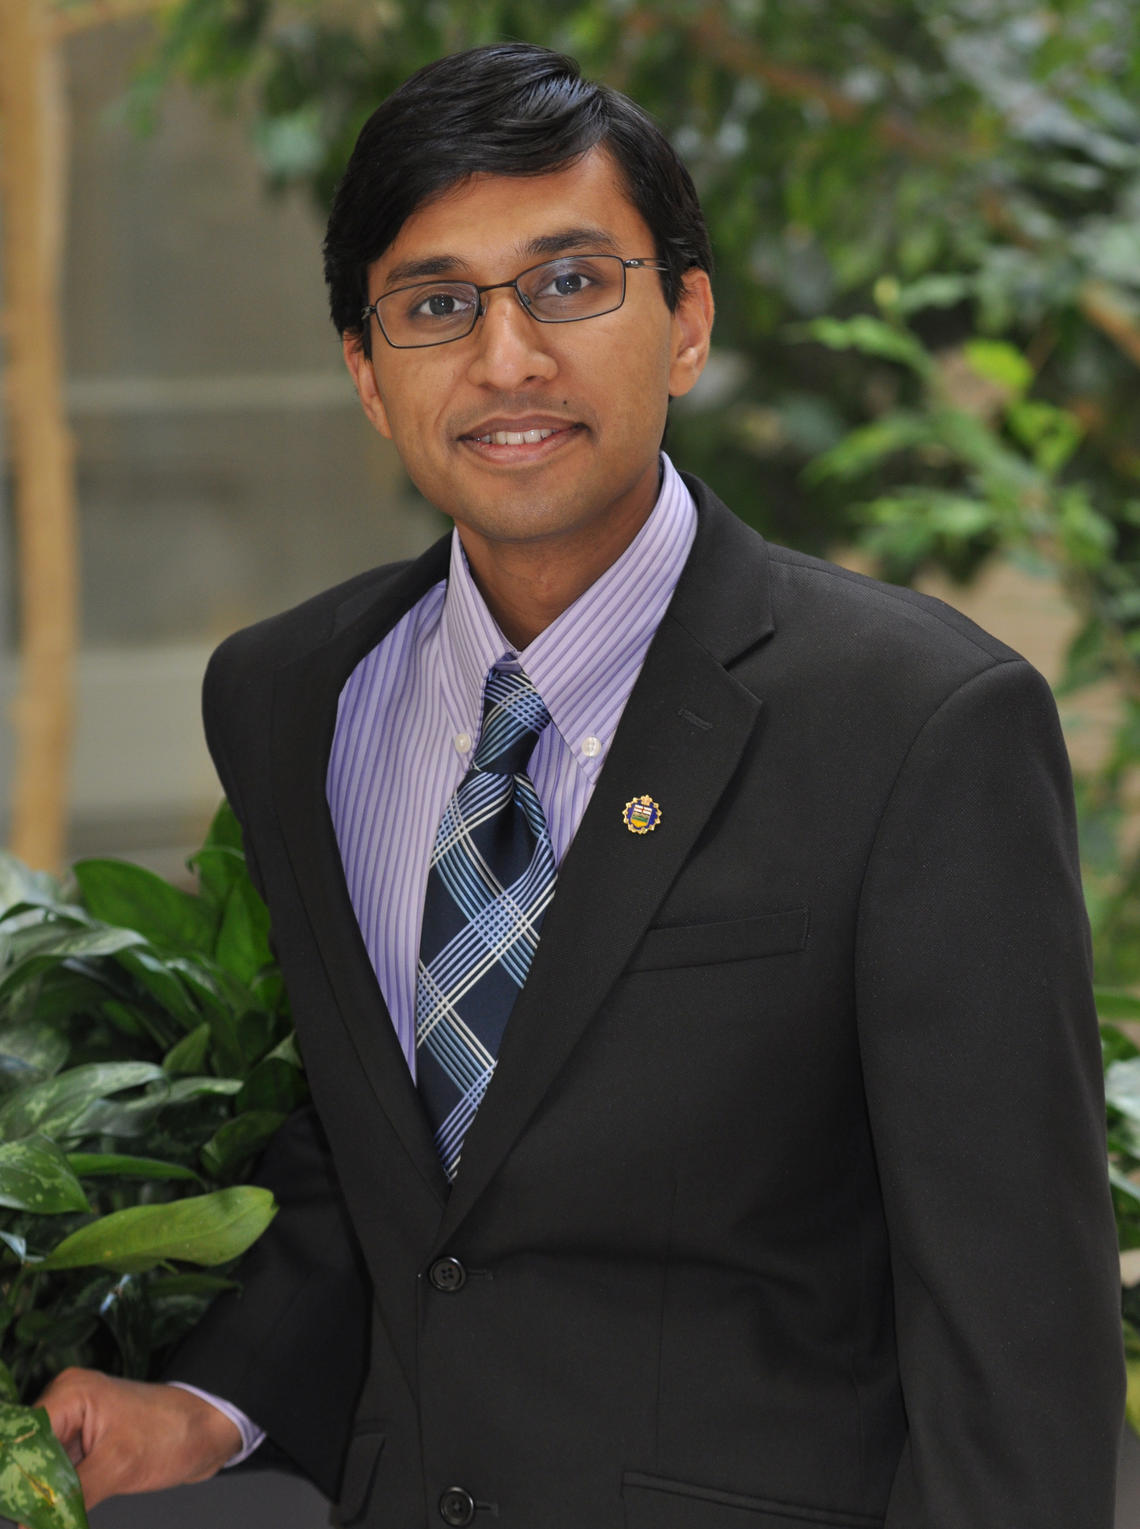 “I owe my career to him, I continue to learn from him and I would not be at Oxford without him,” says Rhodes Scholar Aravind Ganesh, MD ’12, of his mentor Dr. Tom Feasby. 